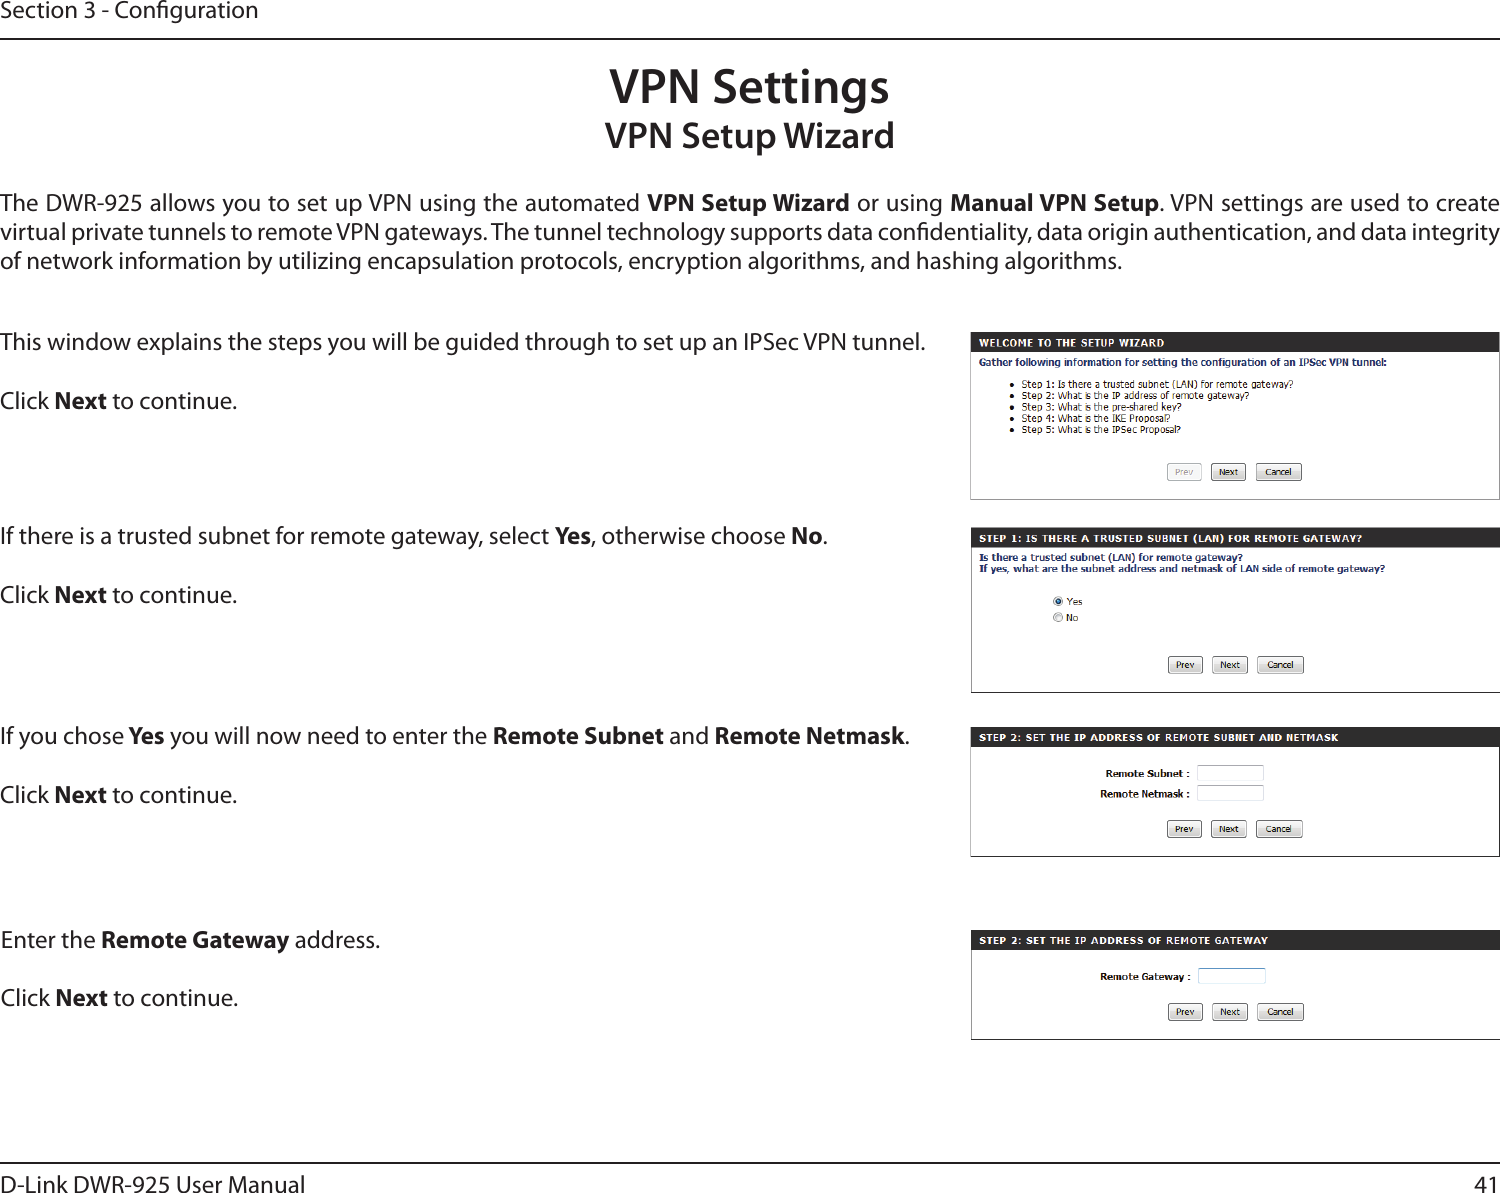 41D-Link DWR-925 User ManualSection 3 - CongurationVPN SettingsVPN Setup WizardThe DWR-925 allows you to set up VPN using the automated VPN Setup Wizard or using Manual VPN Setup. VPN settings are used to create virtual private tunnels to remote VPN gateways. The tunnel technology supports data condentiality, data origin authentication, and data integrity of network information by utilizing encapsulation protocols, encryption algorithms, and hashing algorithms.This window explains the steps you will be guided through to set up an IPSec VPN tunnel.Click Next to continue. If there is a trusted subnet for remote gateway, select Ye s, otherwise choose No.Click Next to continue. If you chose Yes  you will now need to enter the Remote Subnet and Remote Netmask. Click Next to continue. Enter the Remote Gateway address.Click Next to continue. 